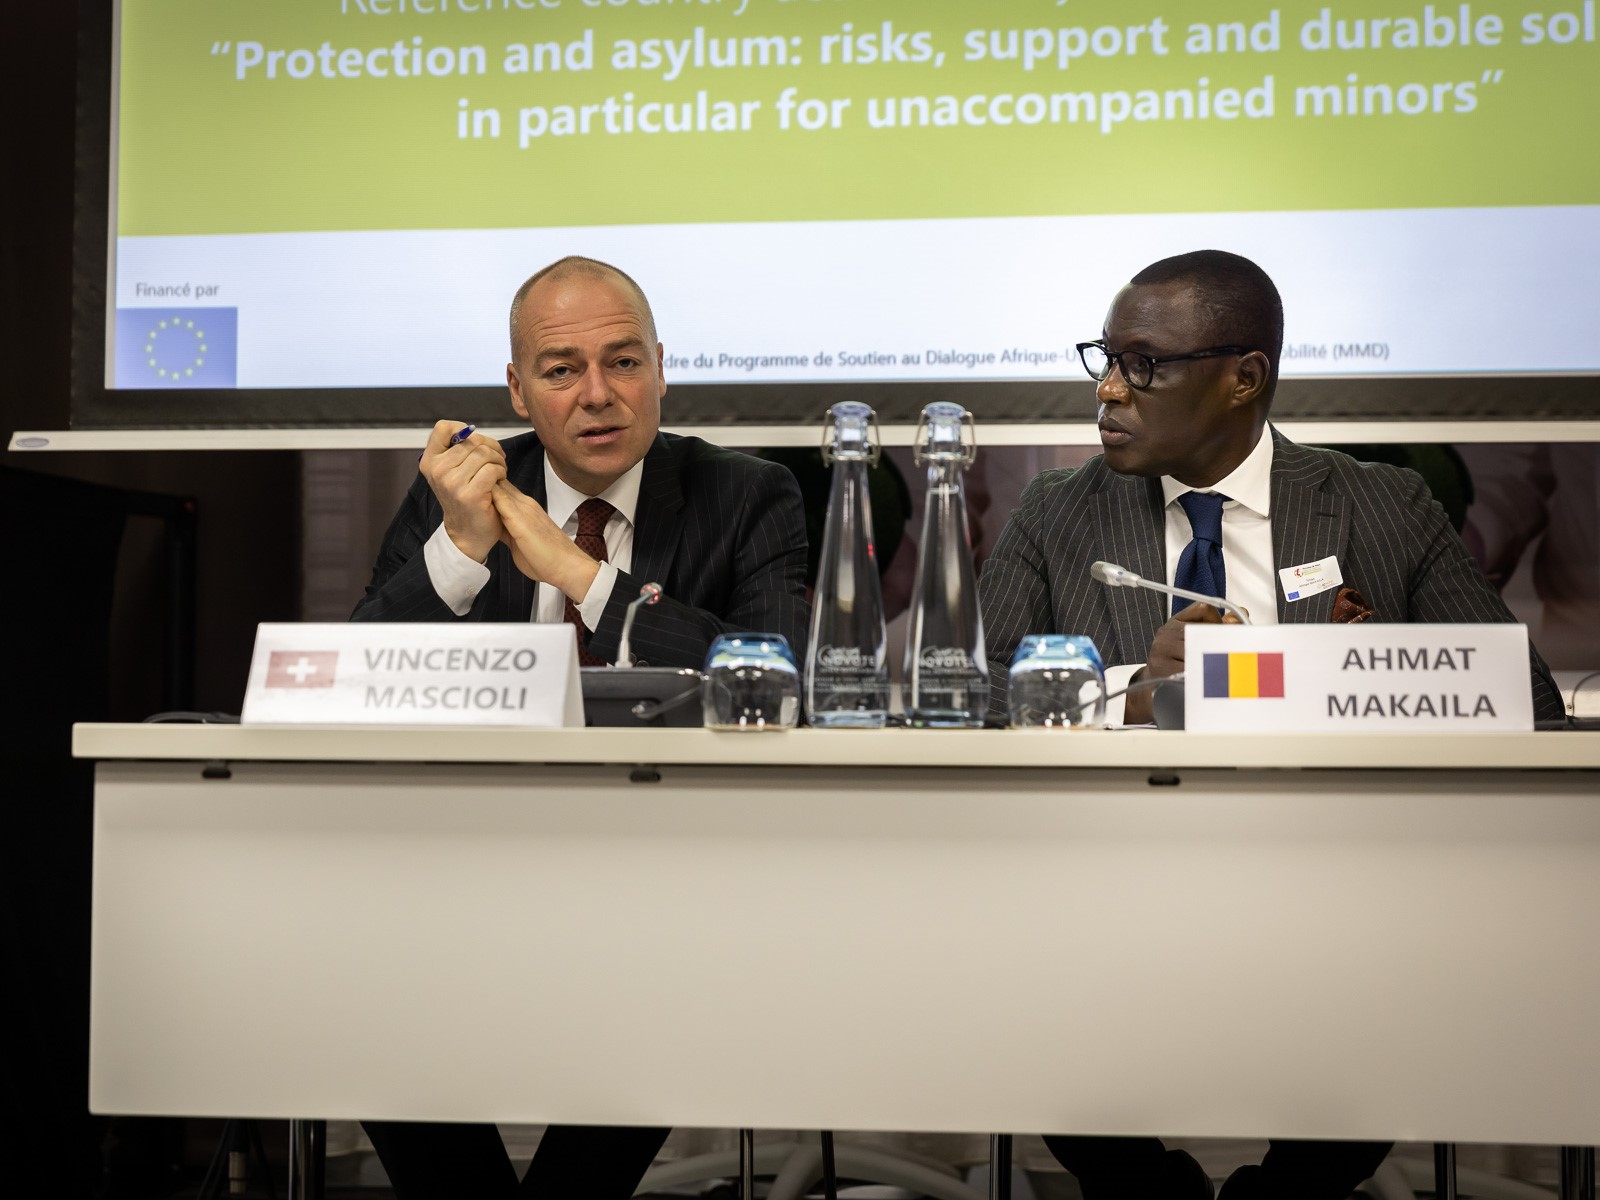 Results and next steps: Reference countries’ activities on protection and asylum